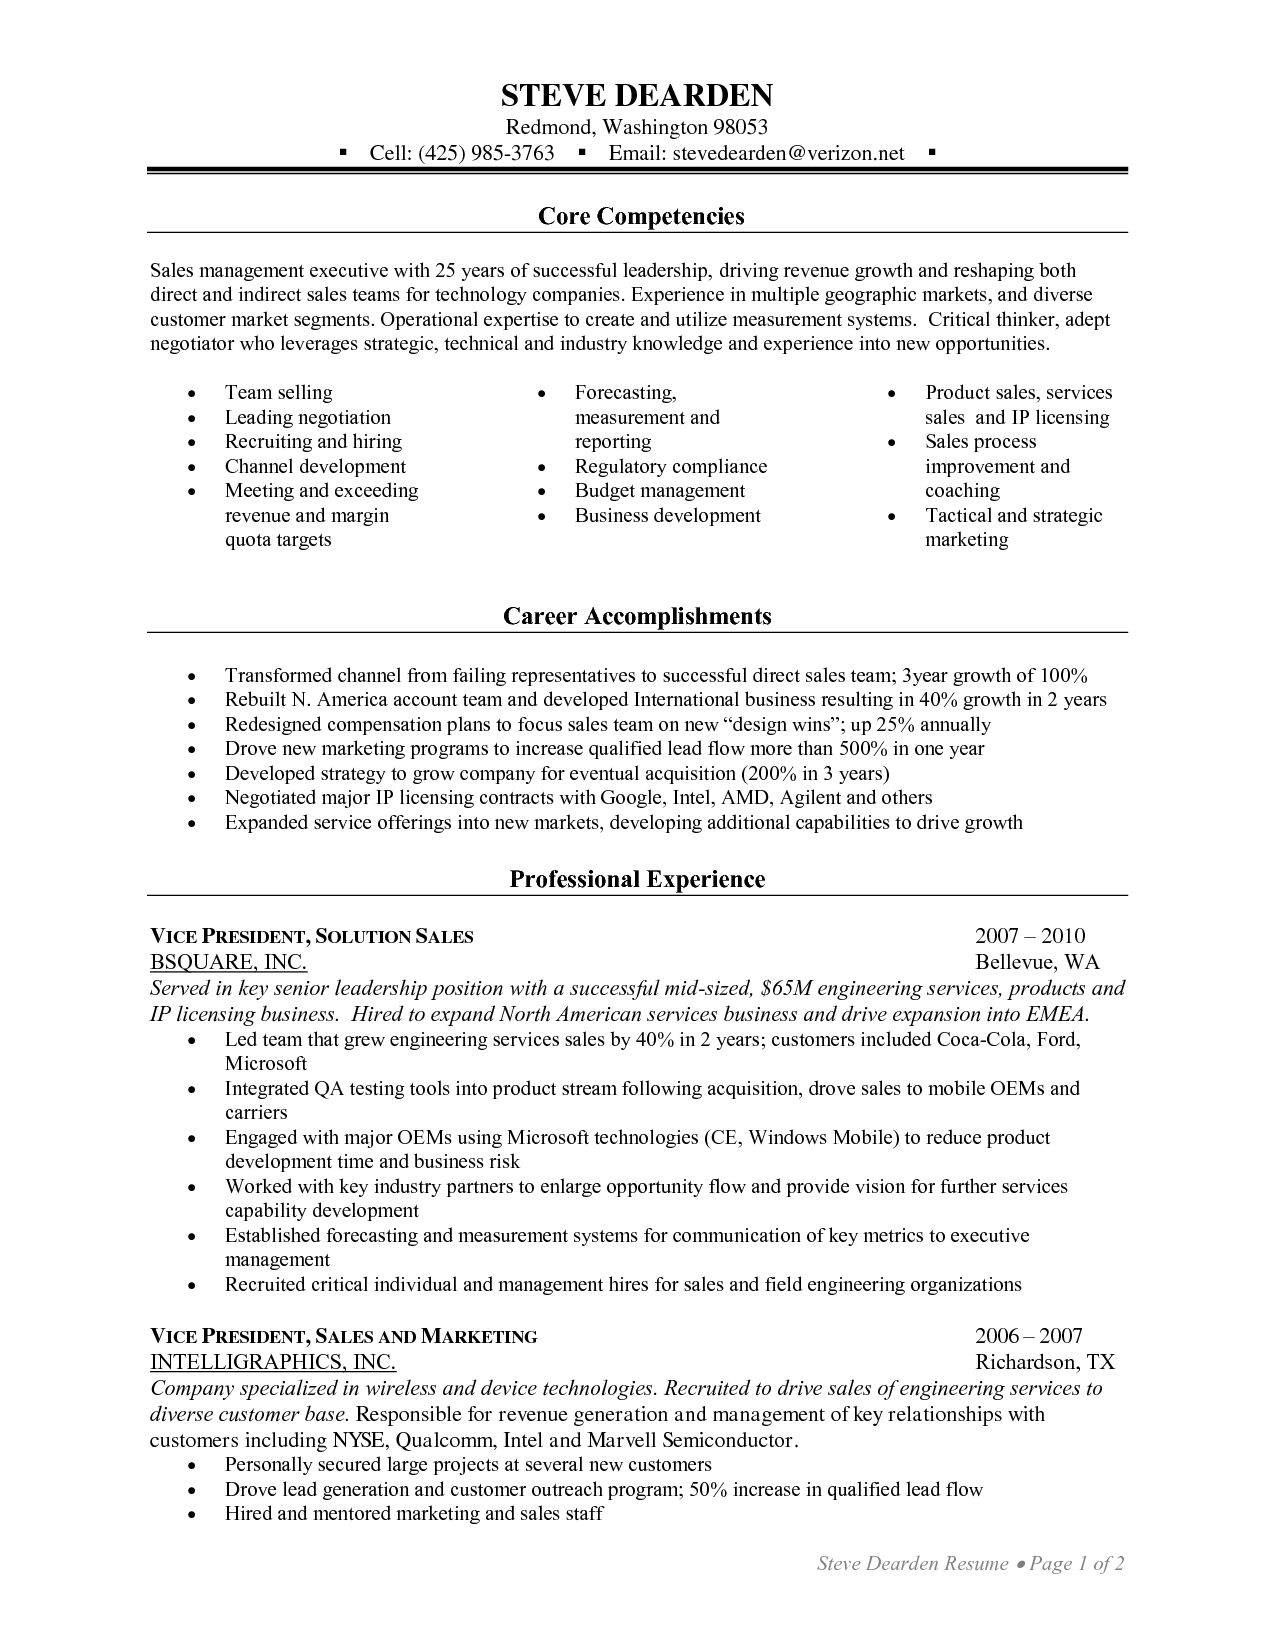 Key Competencies Core Competencies Resume Examples within size 1275 X 1650